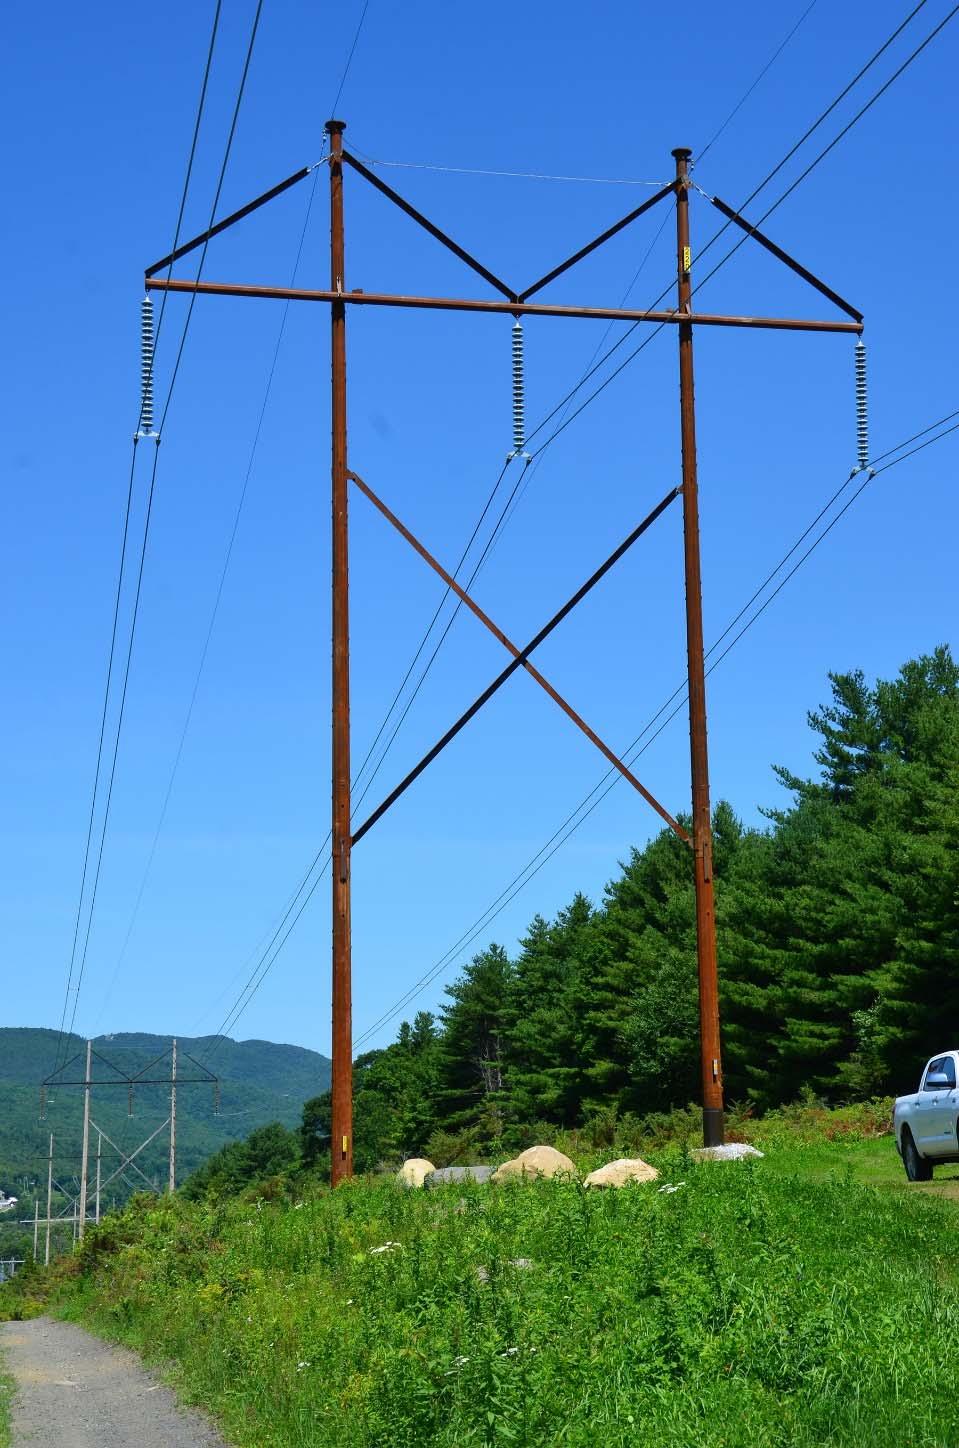 Vermont Electric Power Company - Connecticut River Valley Project Figure 5: View of recent 345 kv replacement structure in foreground, with an existing wooden 345 kv structure similar in the